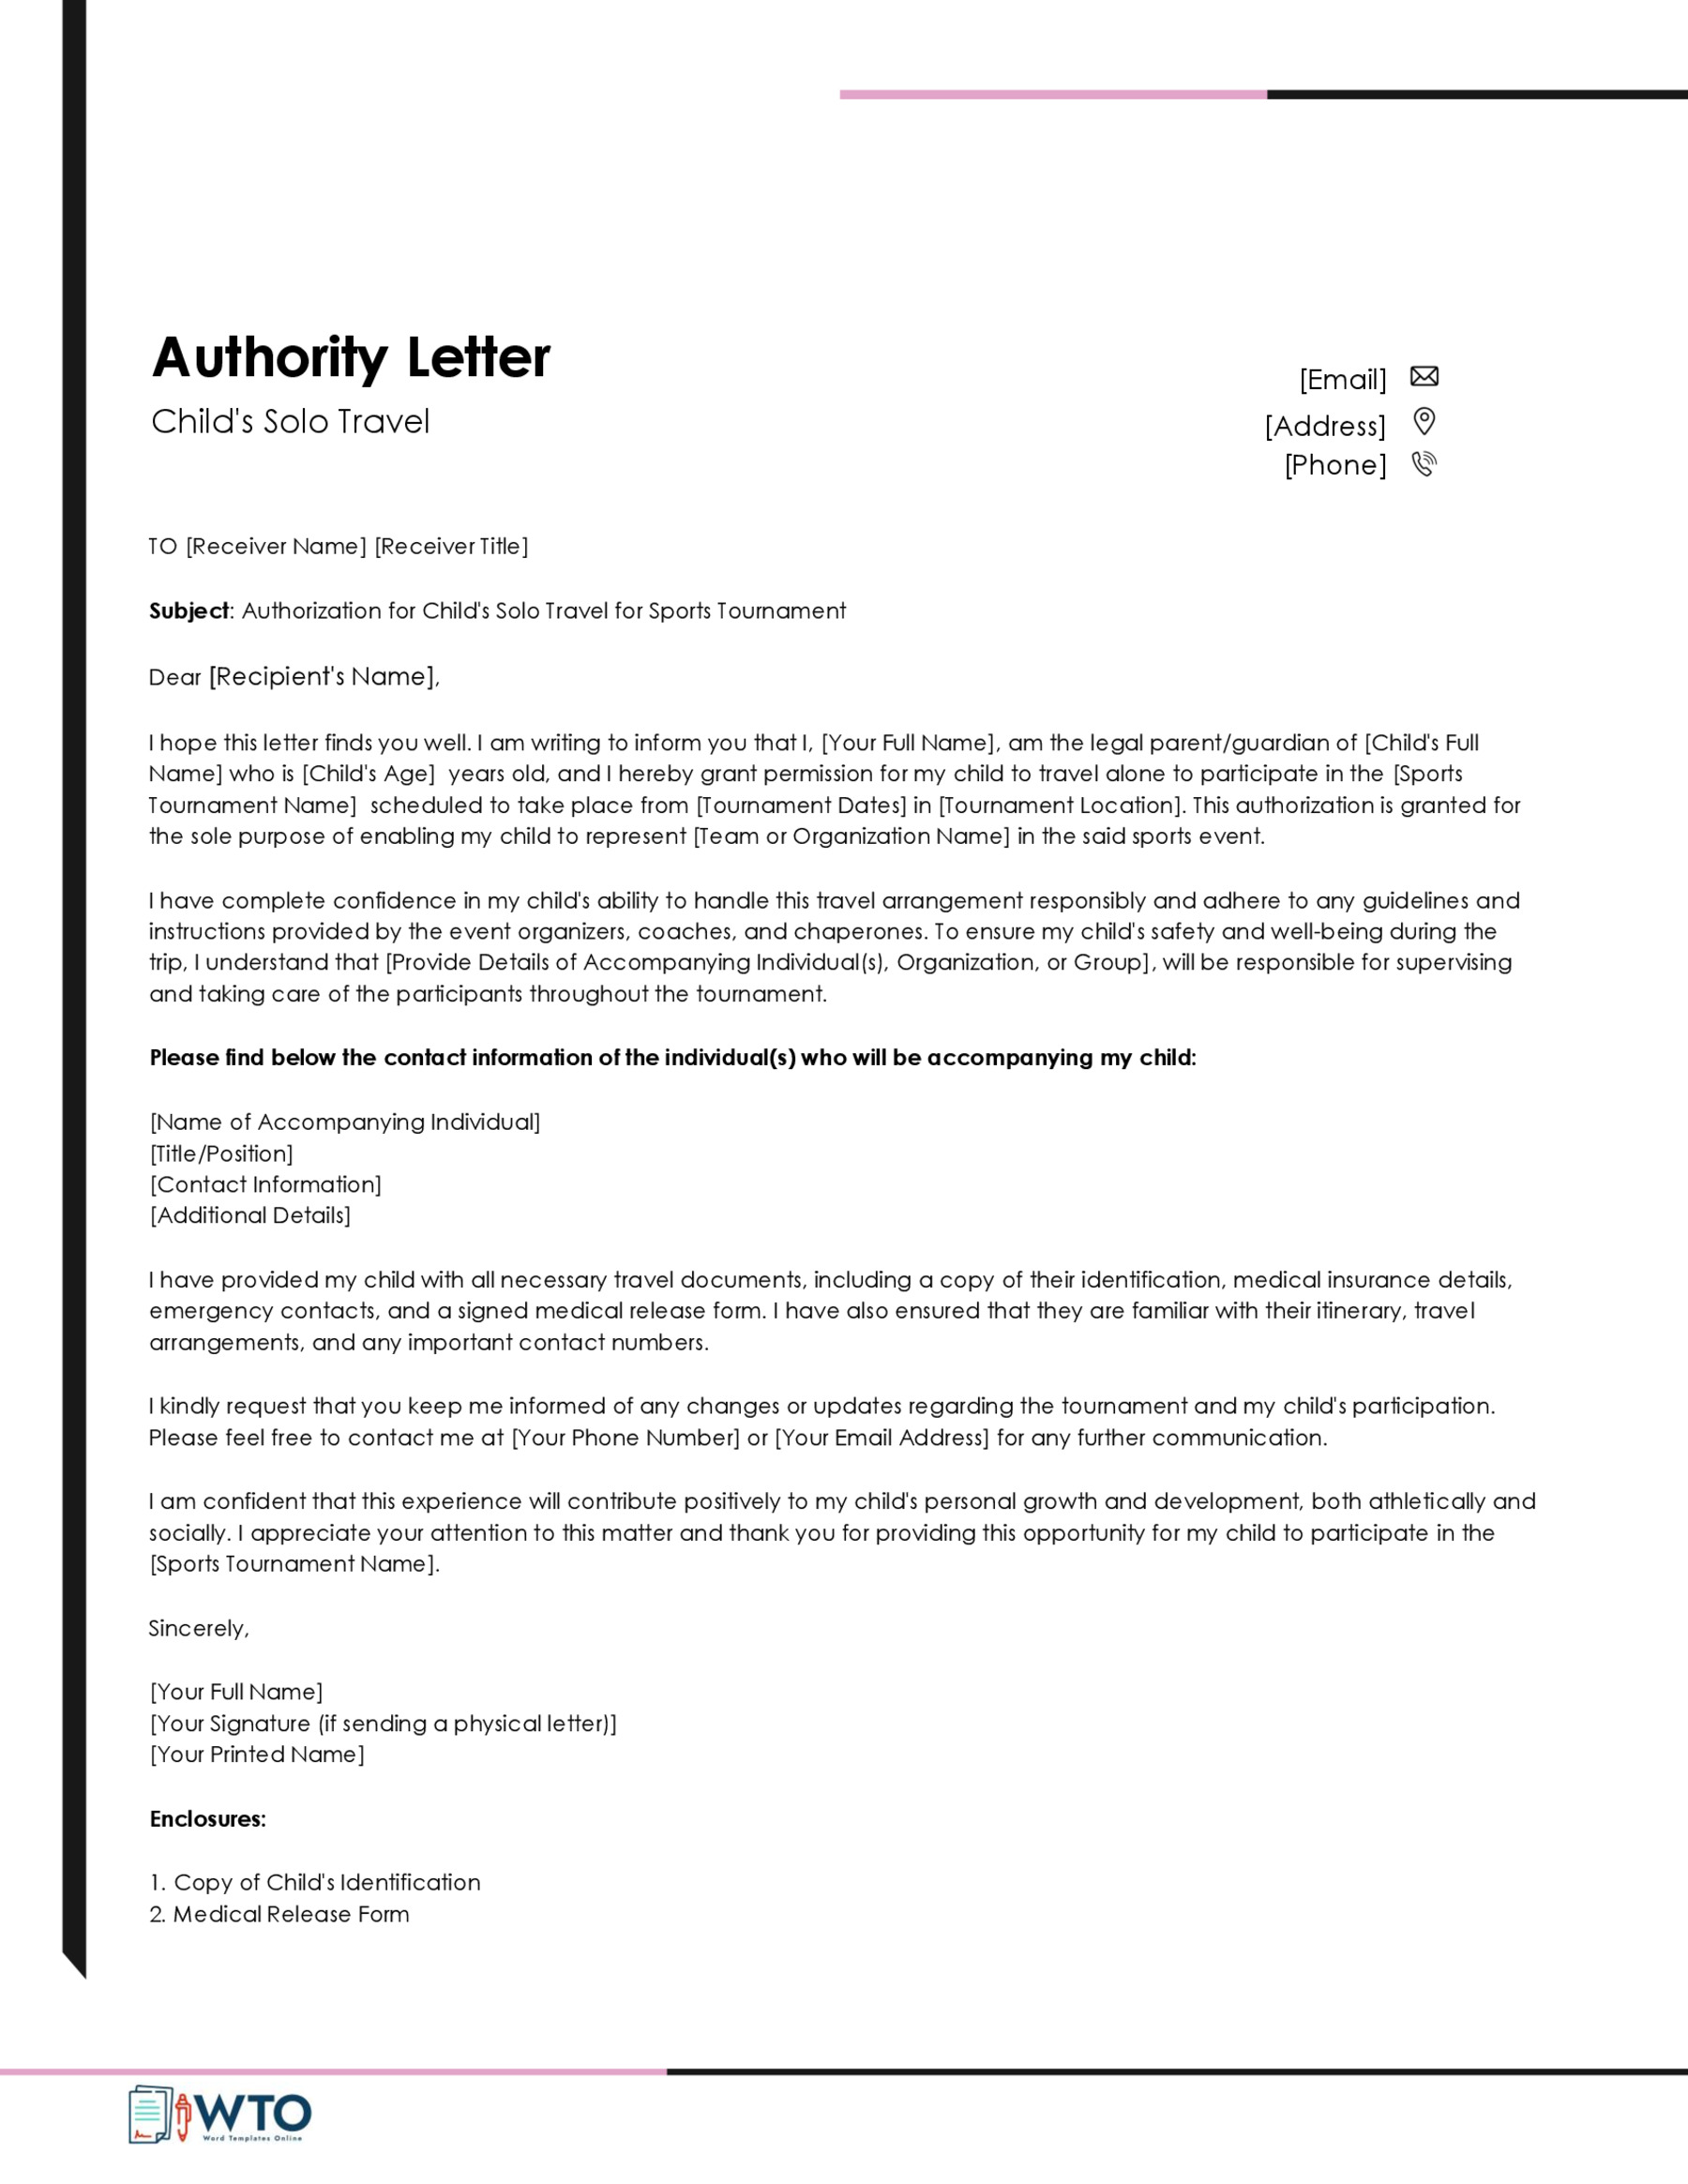 Authorization Letter for a Child to Travel Alone Template-Ms word Format